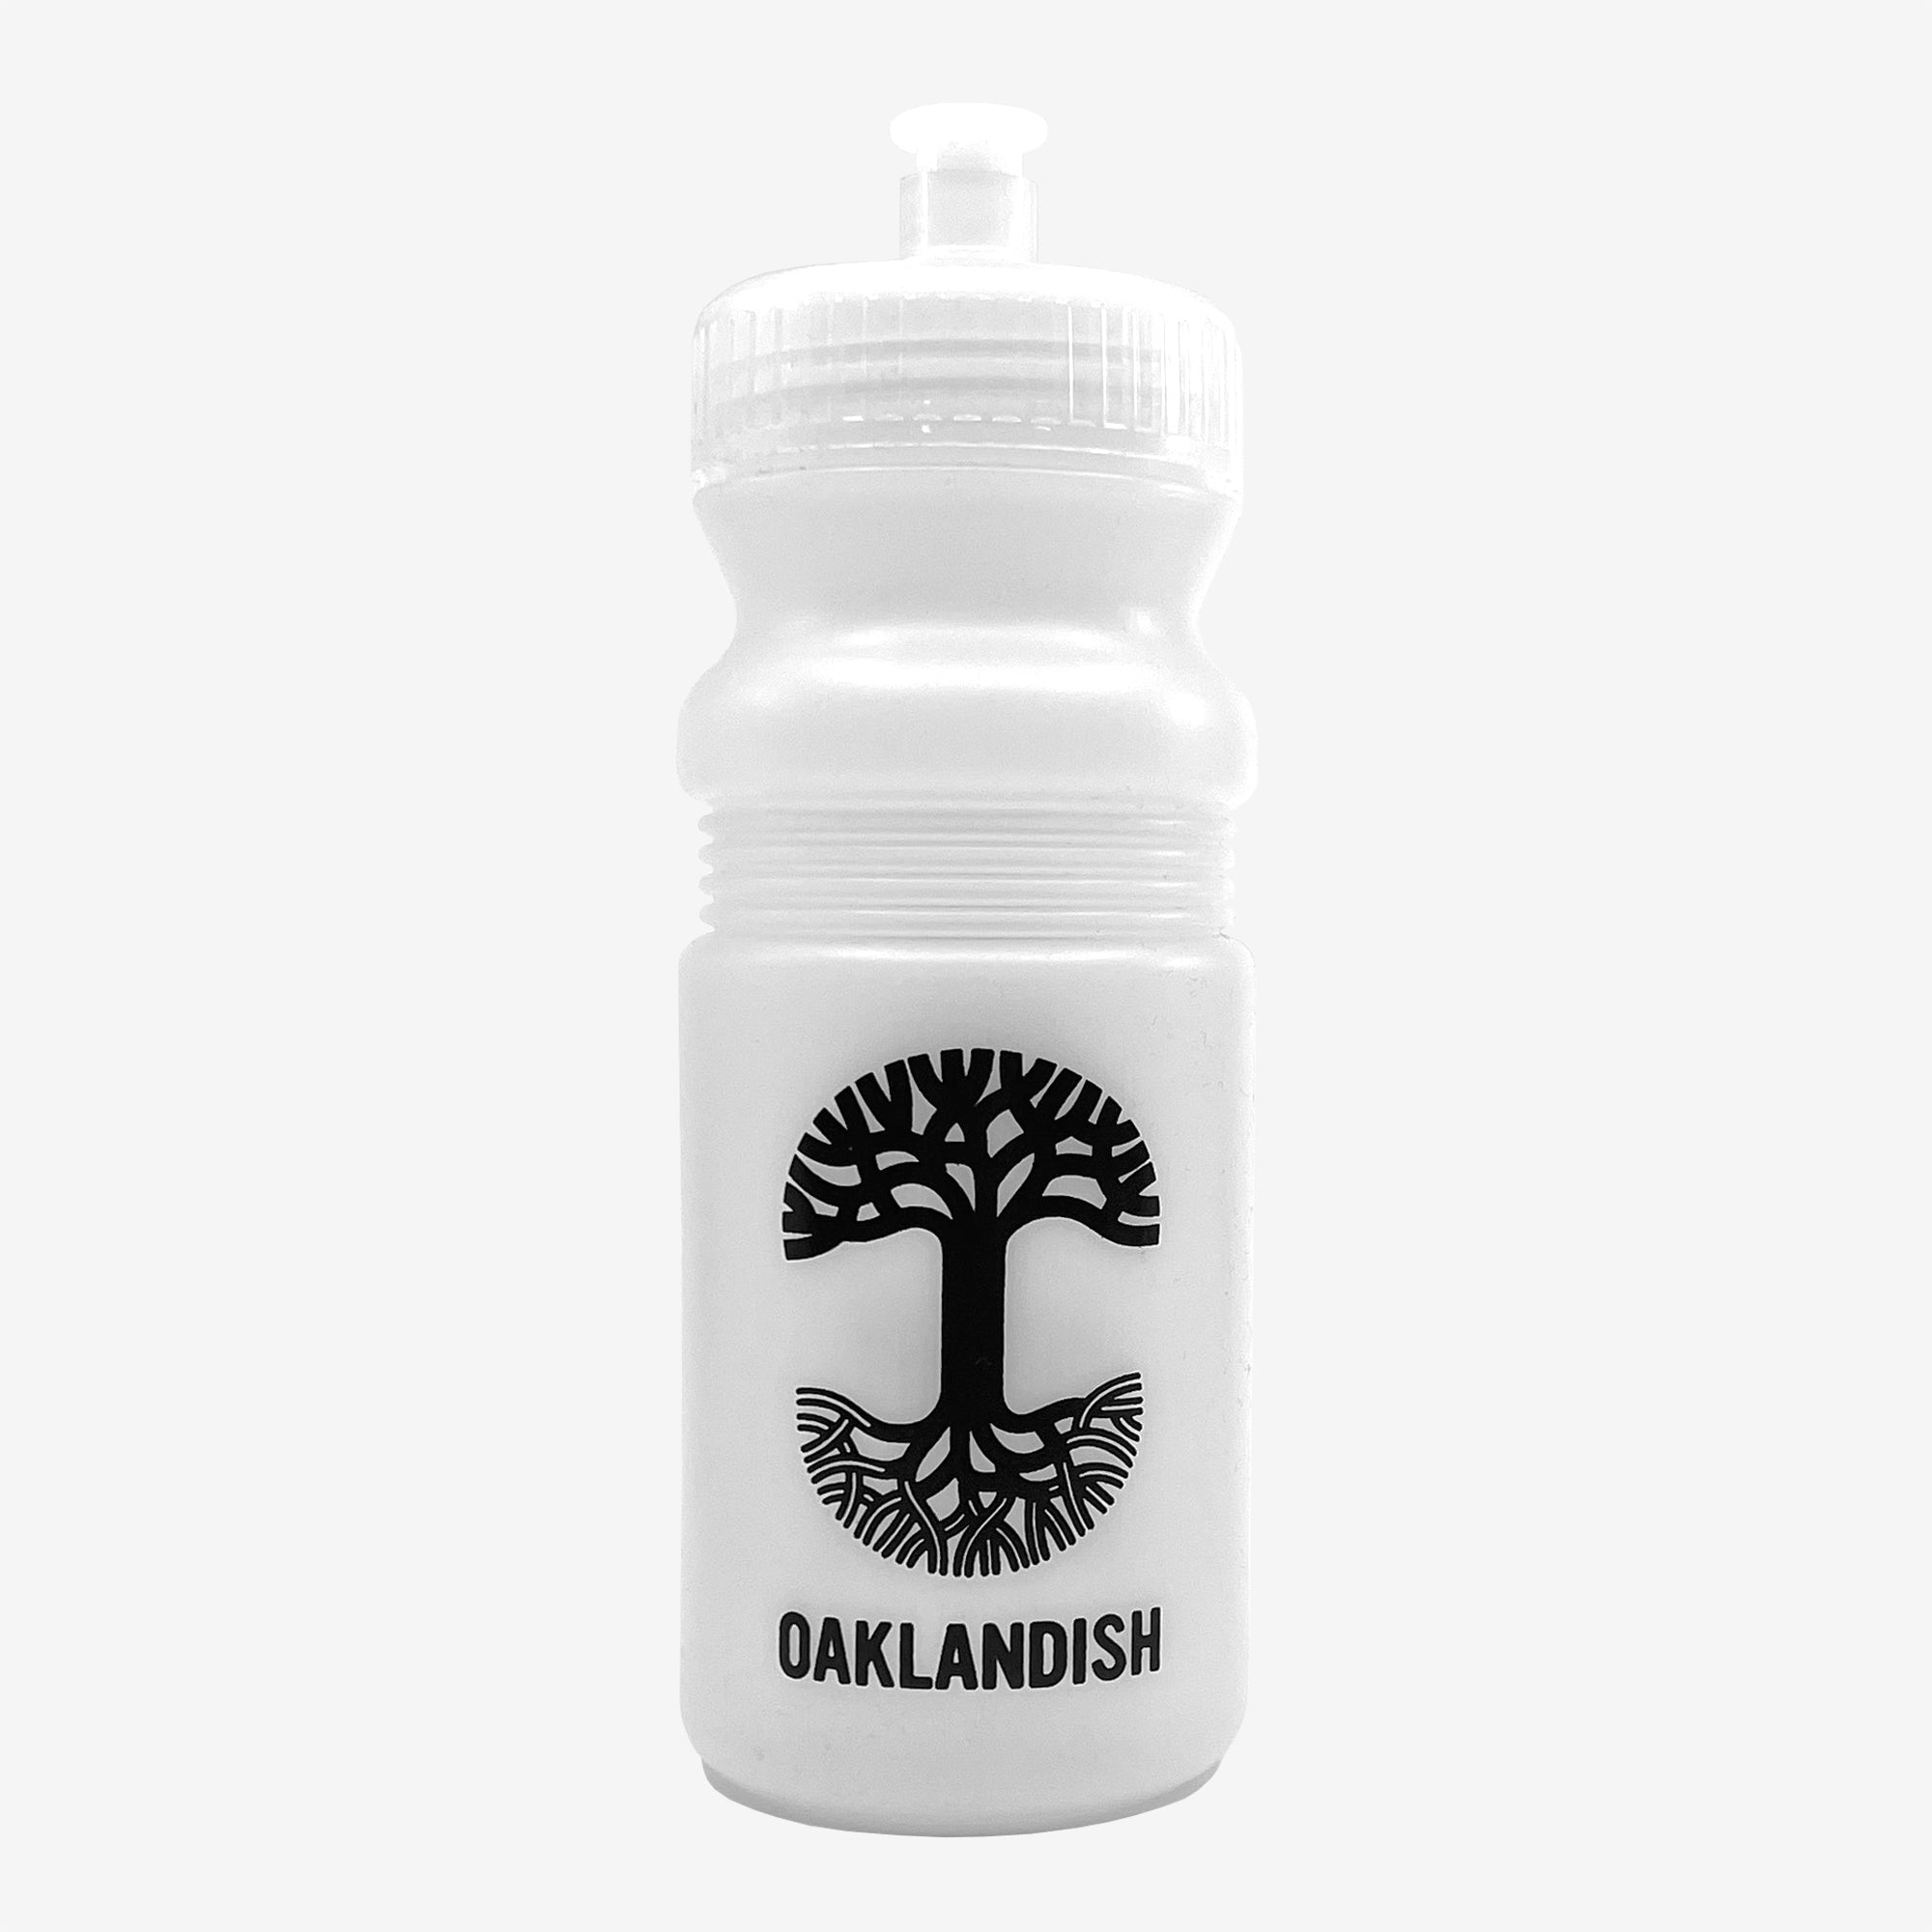 Frost white bicycle water bottle with a black Oaklandish tree logo and wordmark .